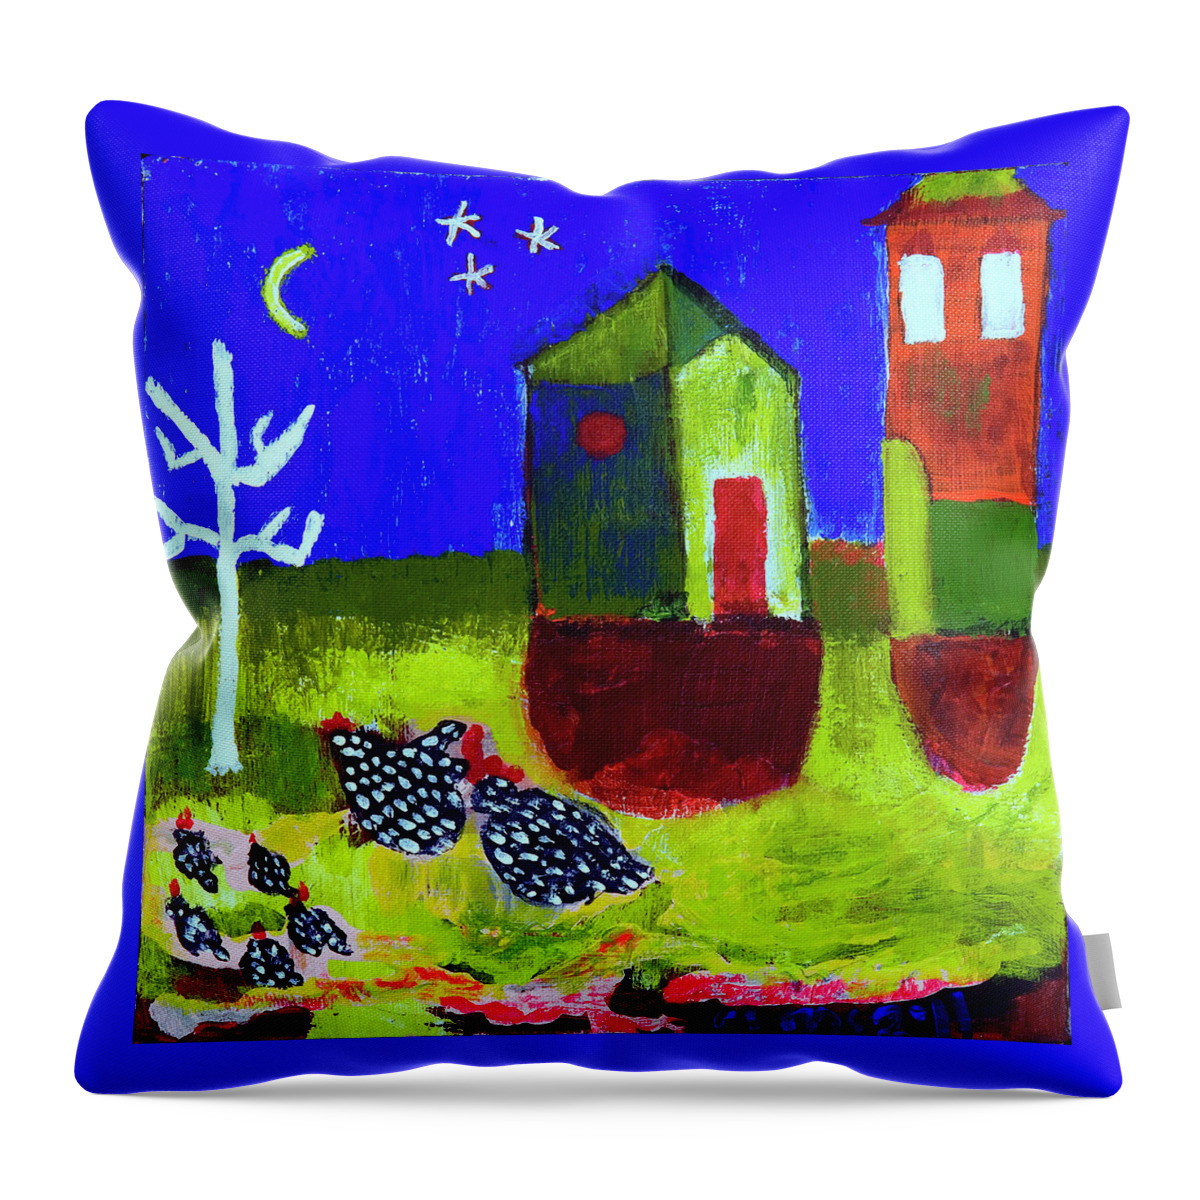 Houses Throw Pillow featuring the painting Lollipop Village by Angela Annas